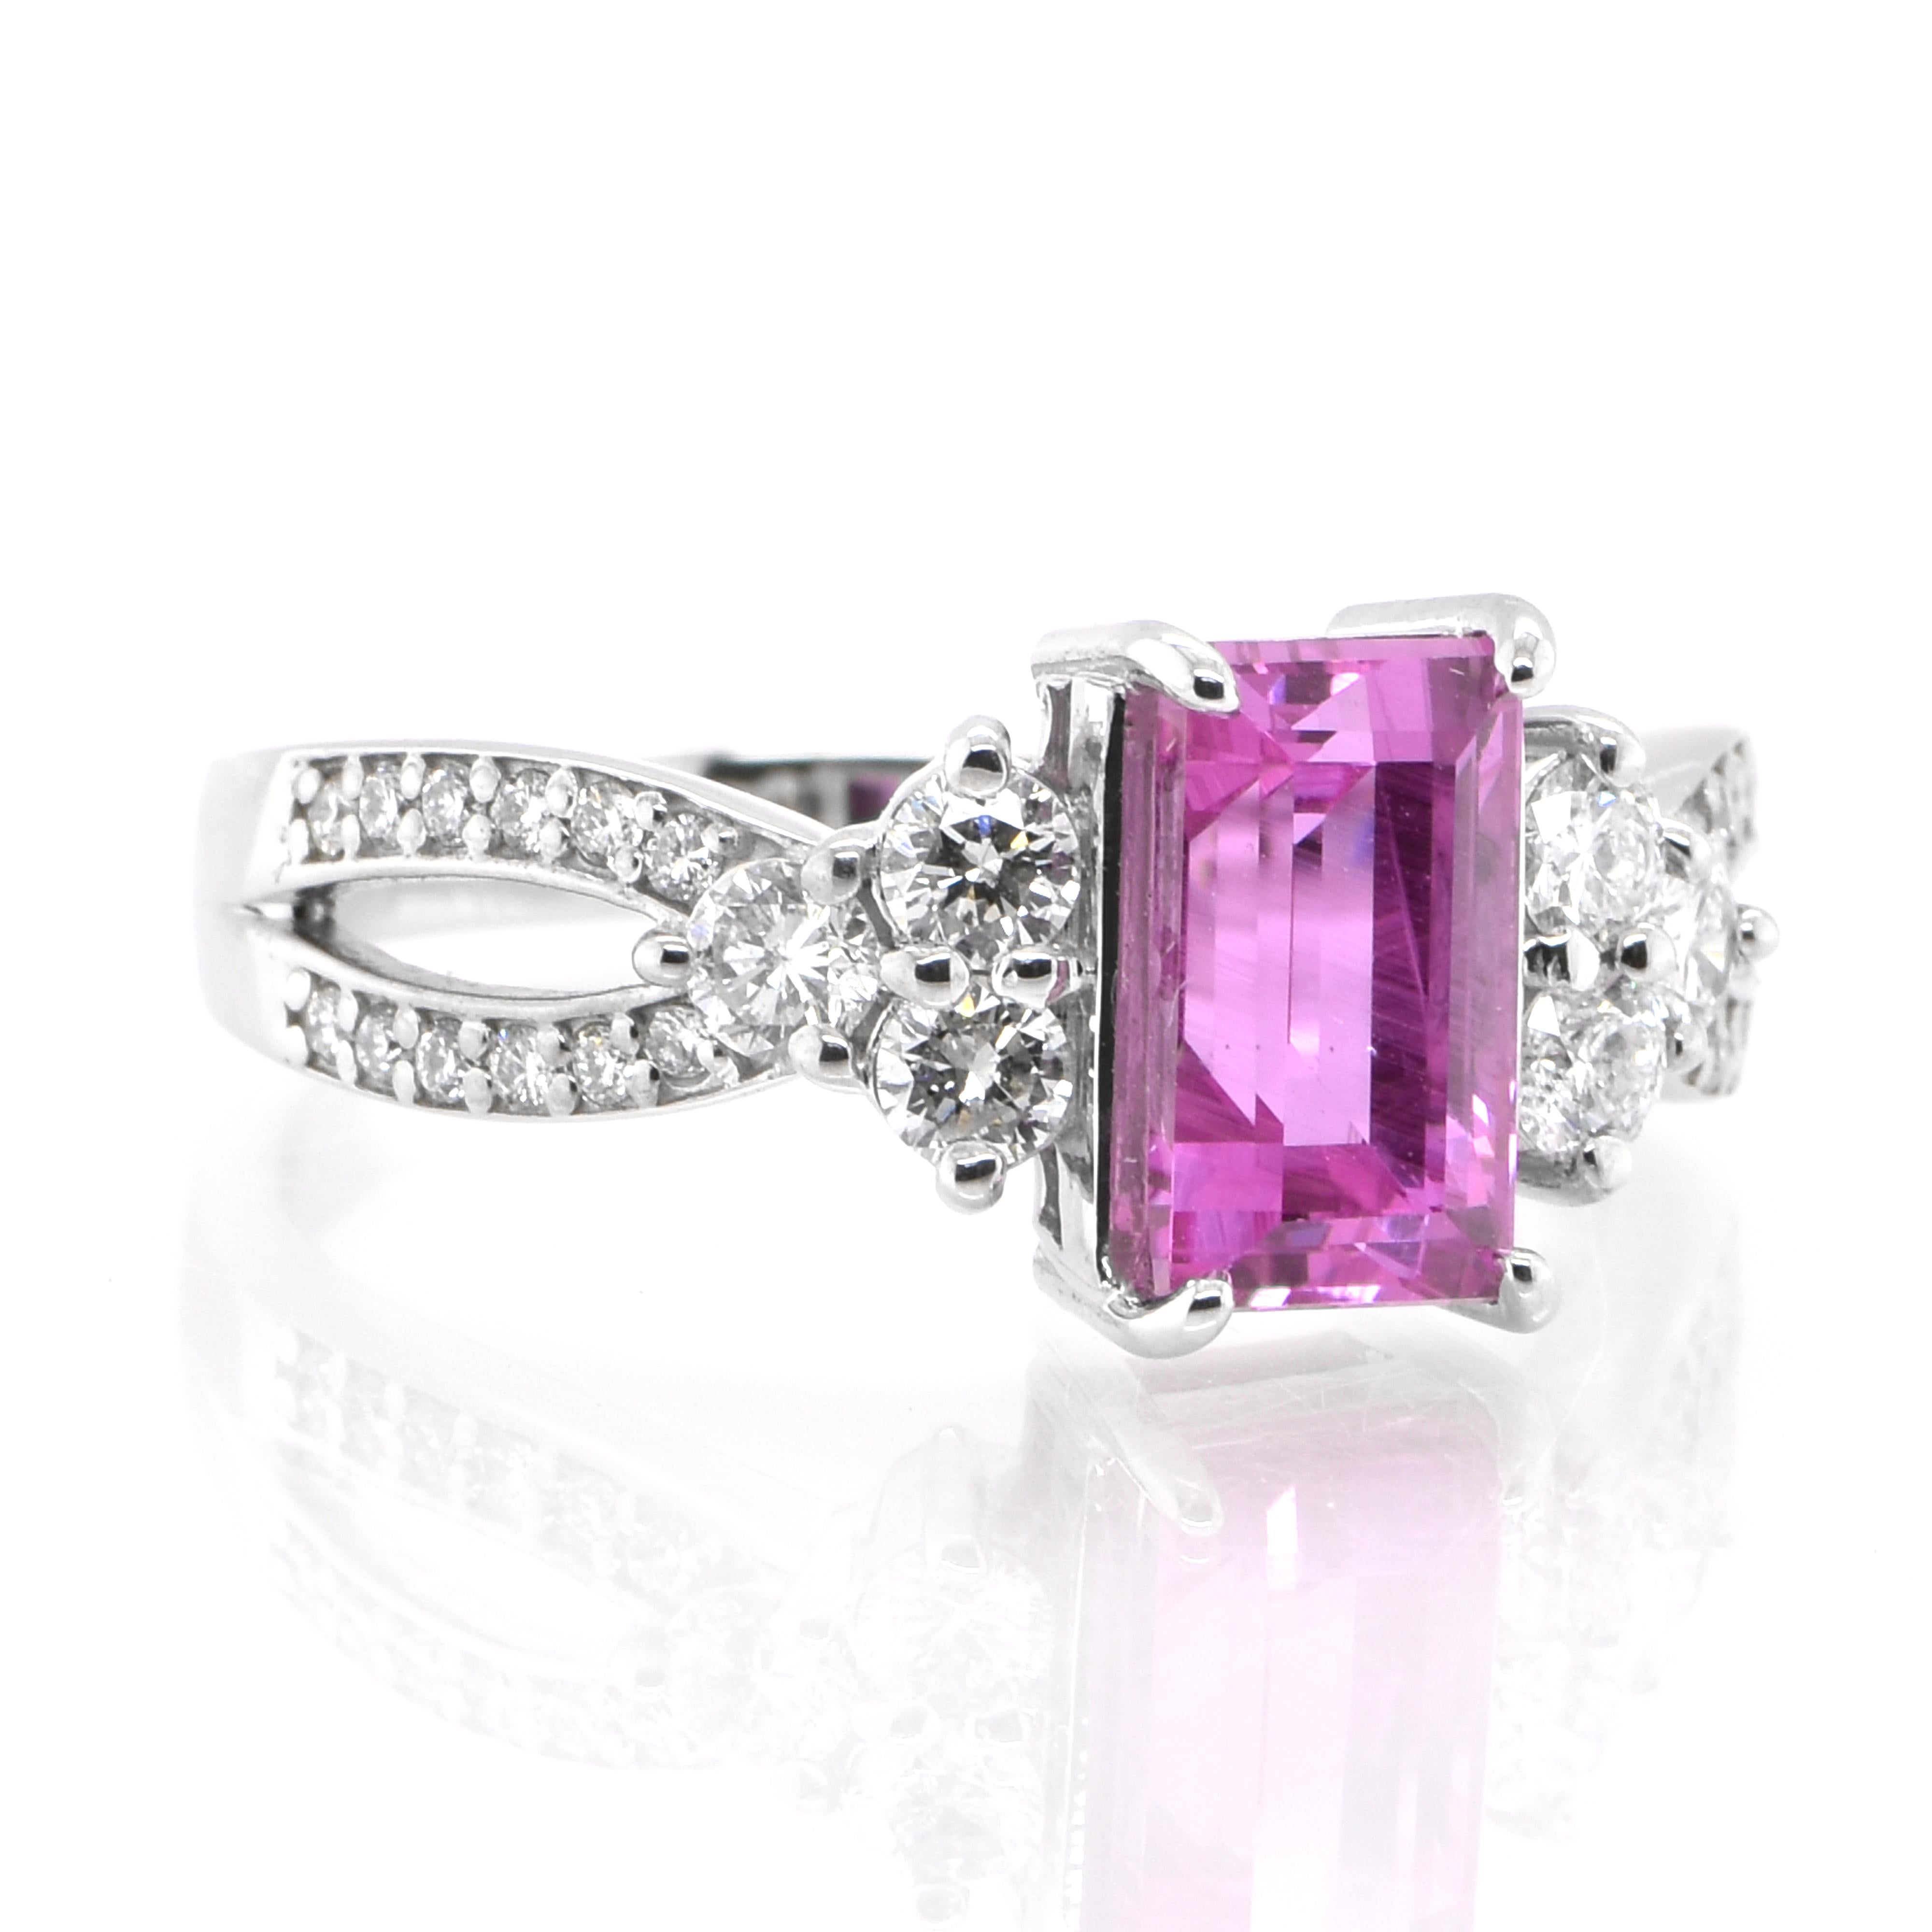 Modern GIA Certified 2.56 Carat Natural Pink Sapphire and Diamond Ring Set in Platinum